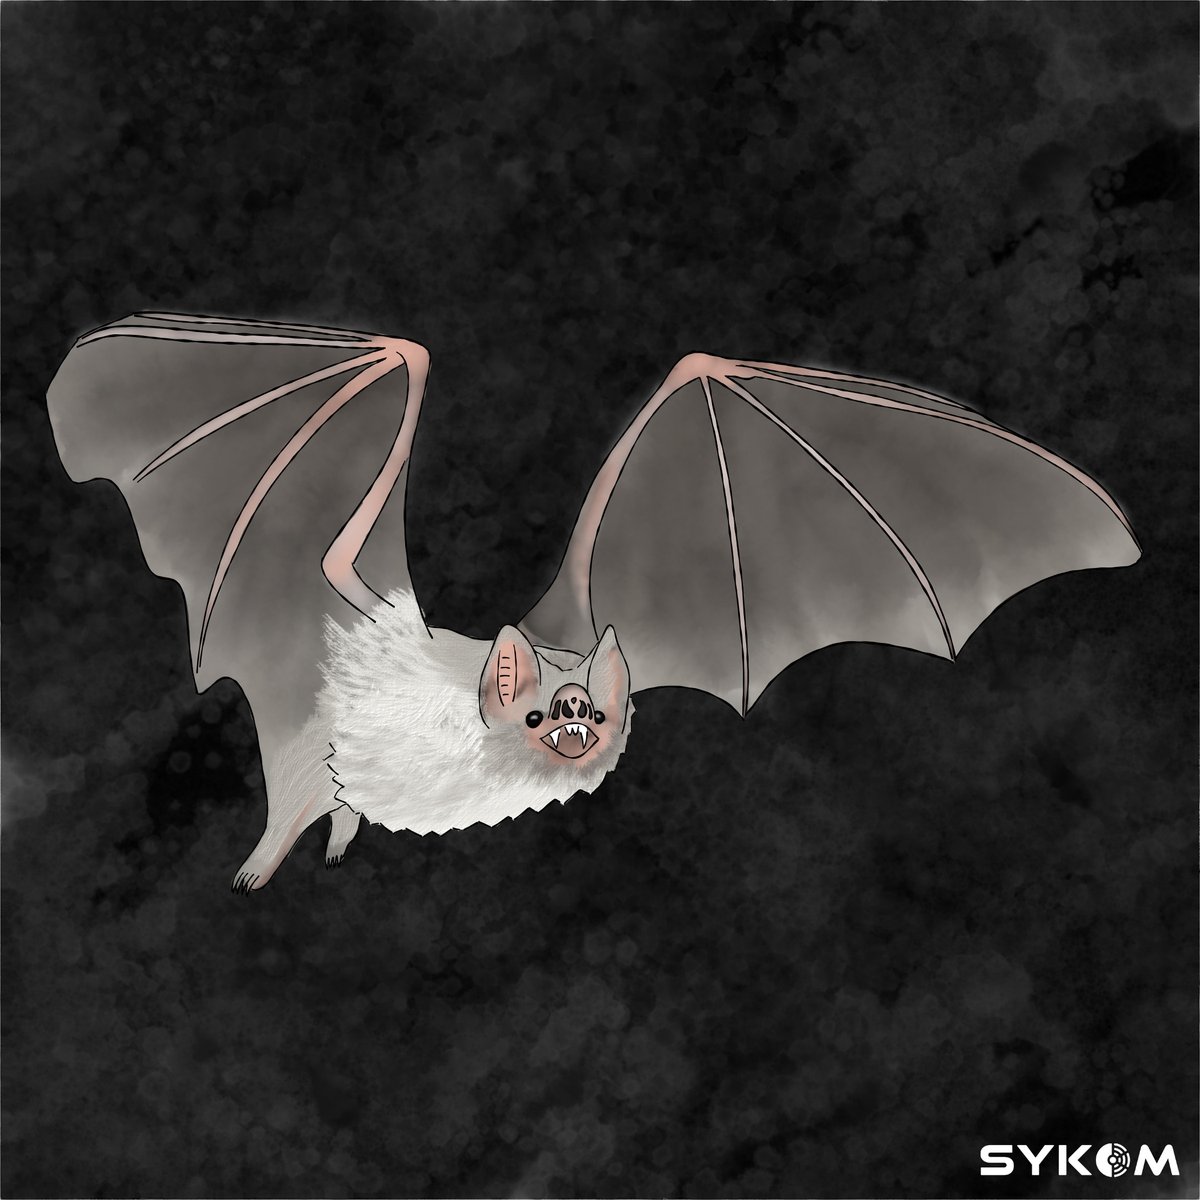 Vampire bats are the only mammal that survive exclusively on blood.😬 They have lost genes associated with sweet & bitter taste receptors, prevent iron absorption by gastrointestinal cells, and create gastric acid, all of which are prefect for an all blood diet. #scicomm #sciart